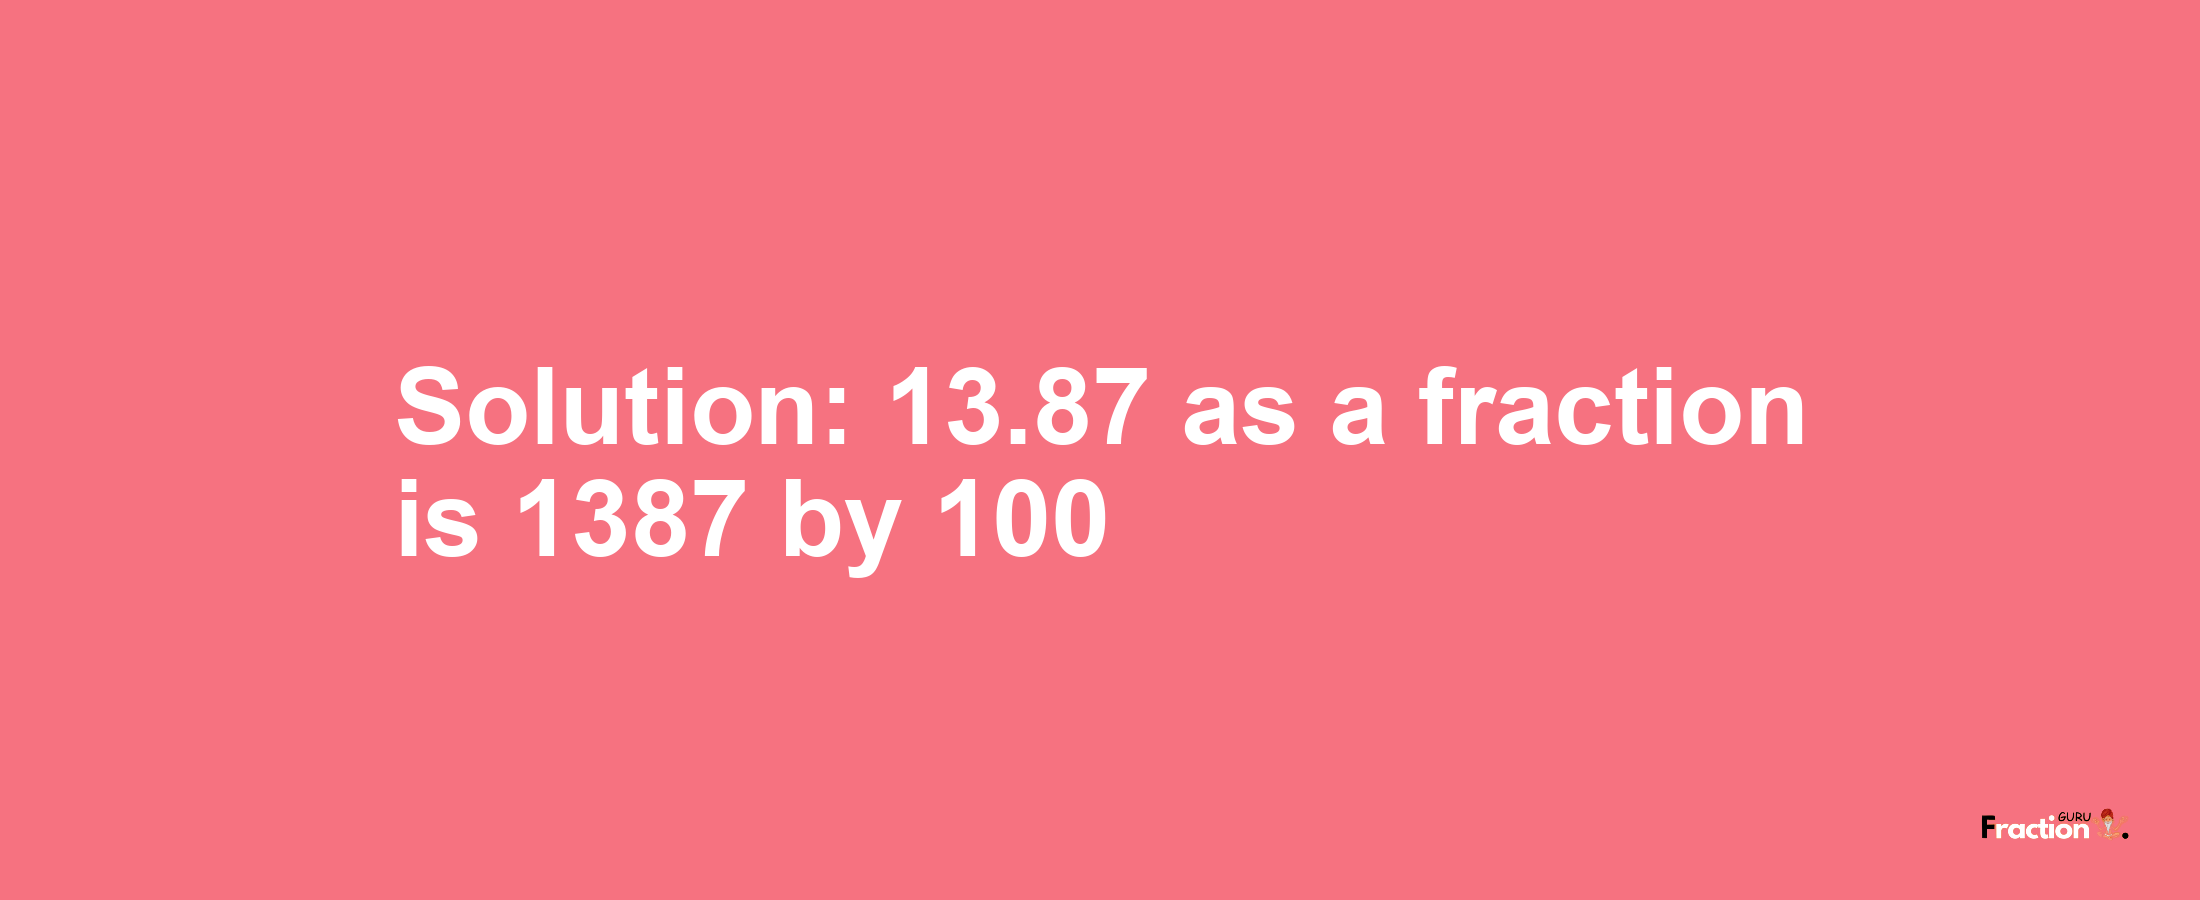 Solution:13.87 as a fraction is 1387/100